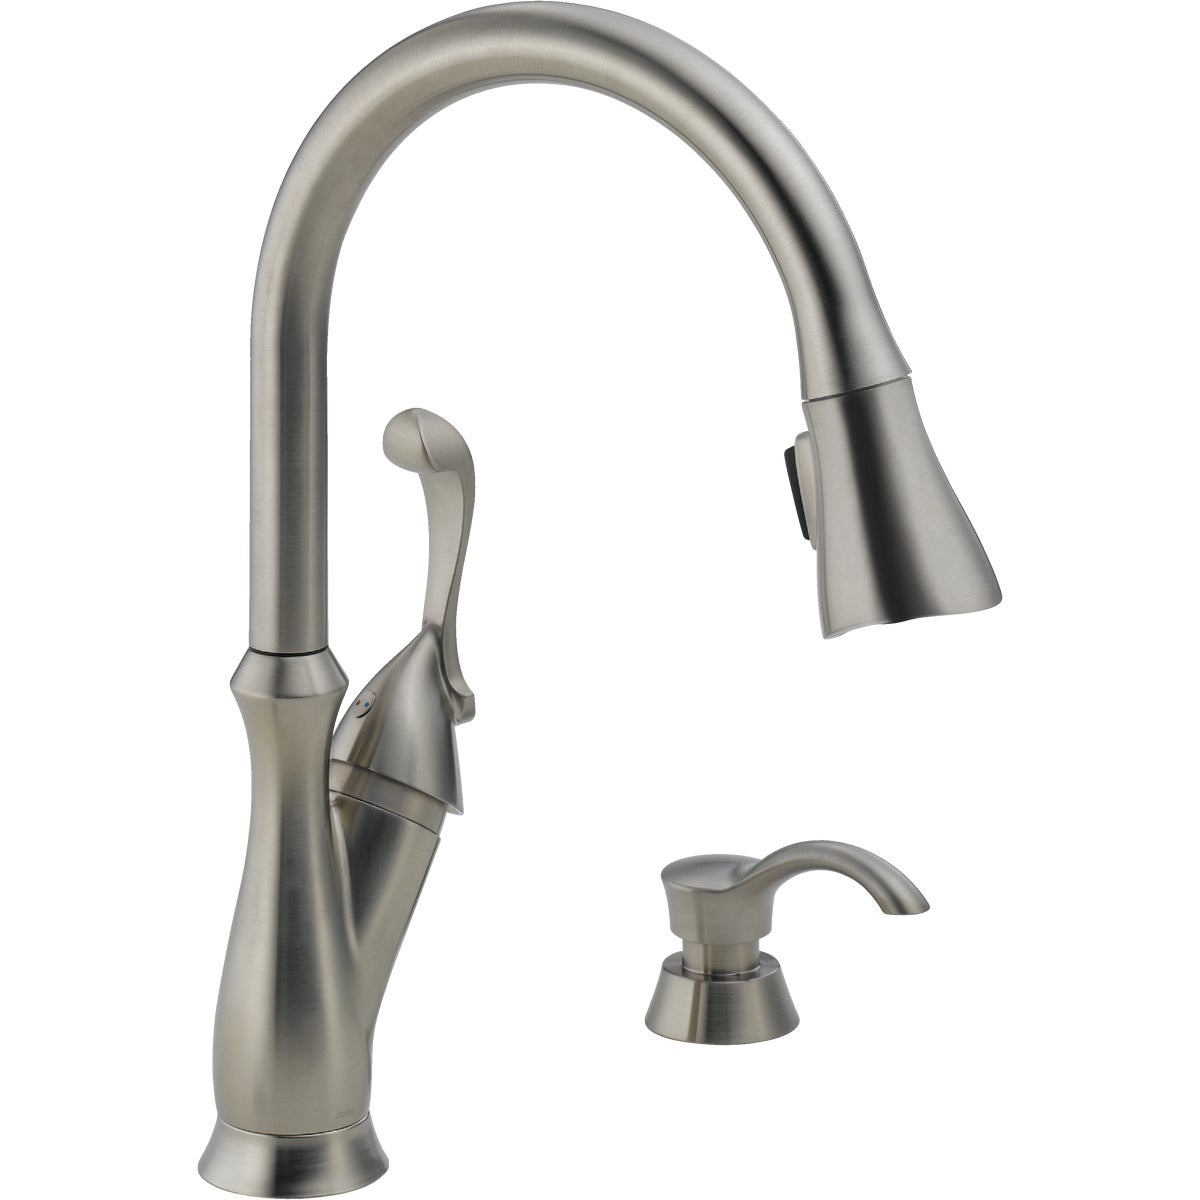 Delta Arabella 1-Handle Lever Pull-Down Kitchen Faucet with Soap Dispenser, Stainless